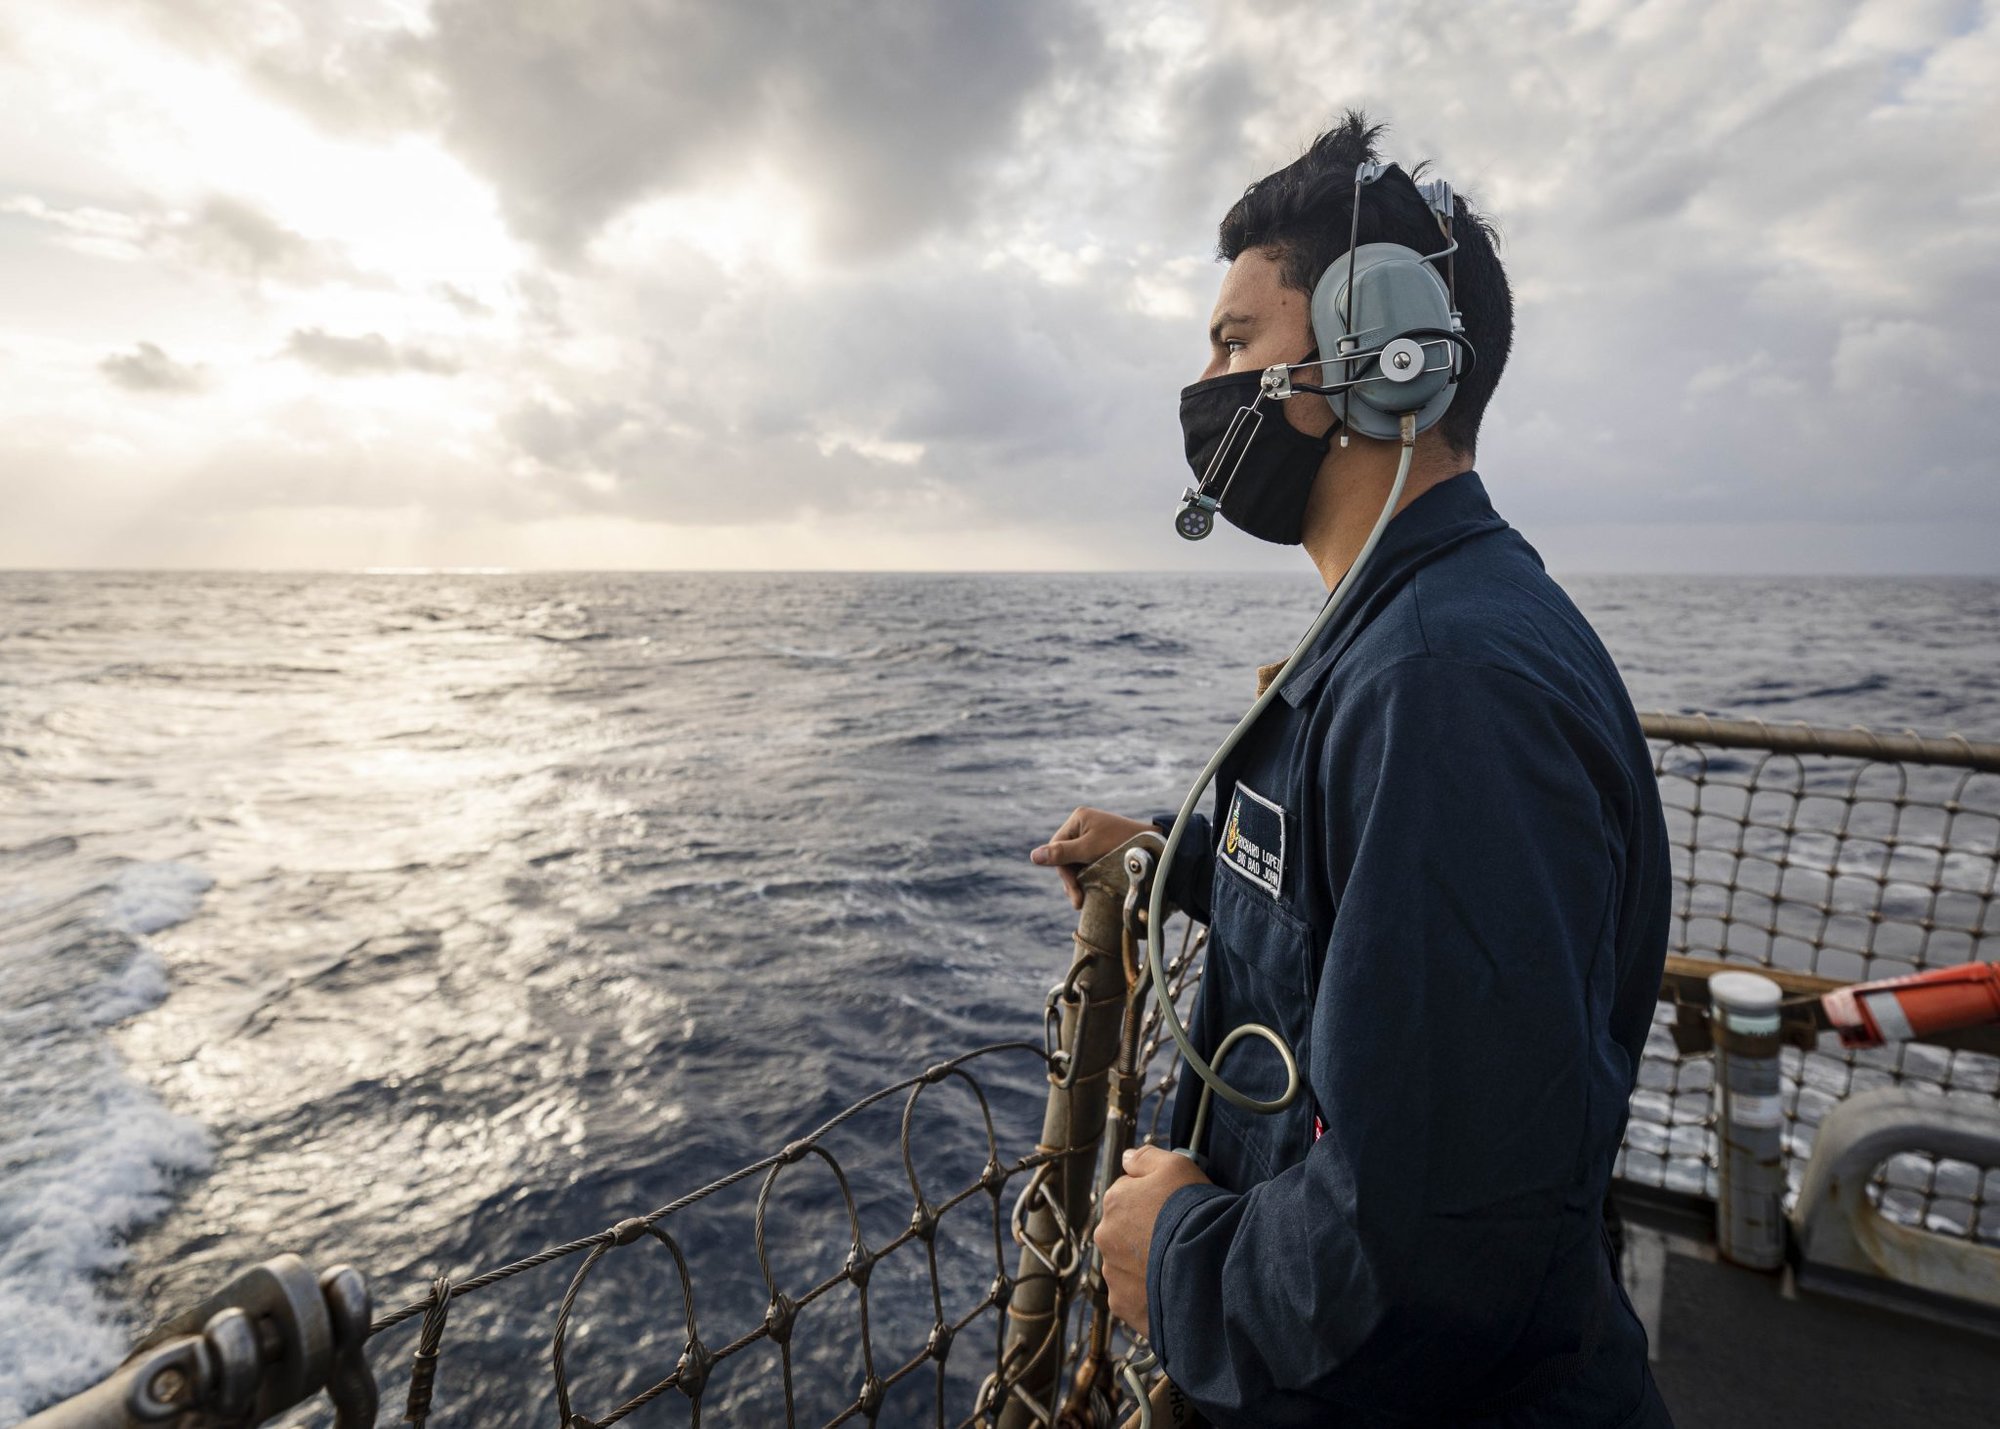 Indo-Pacific doubleheader, PARACEL ISLANDS, SOUTH CHINA SEA (Feb. 05, 2021) Seaman Recruit Richard Lopez, from Tulare, Calif., stands watch as aft lookout on the flight deck aboard the Arleigh Burke-class guided-missile destroyer USS John S. McCain (DDG 56) as the ship conducts routine underway operations. Photo by Mass Communication Specialist 2nd Class Markus Castaneda.